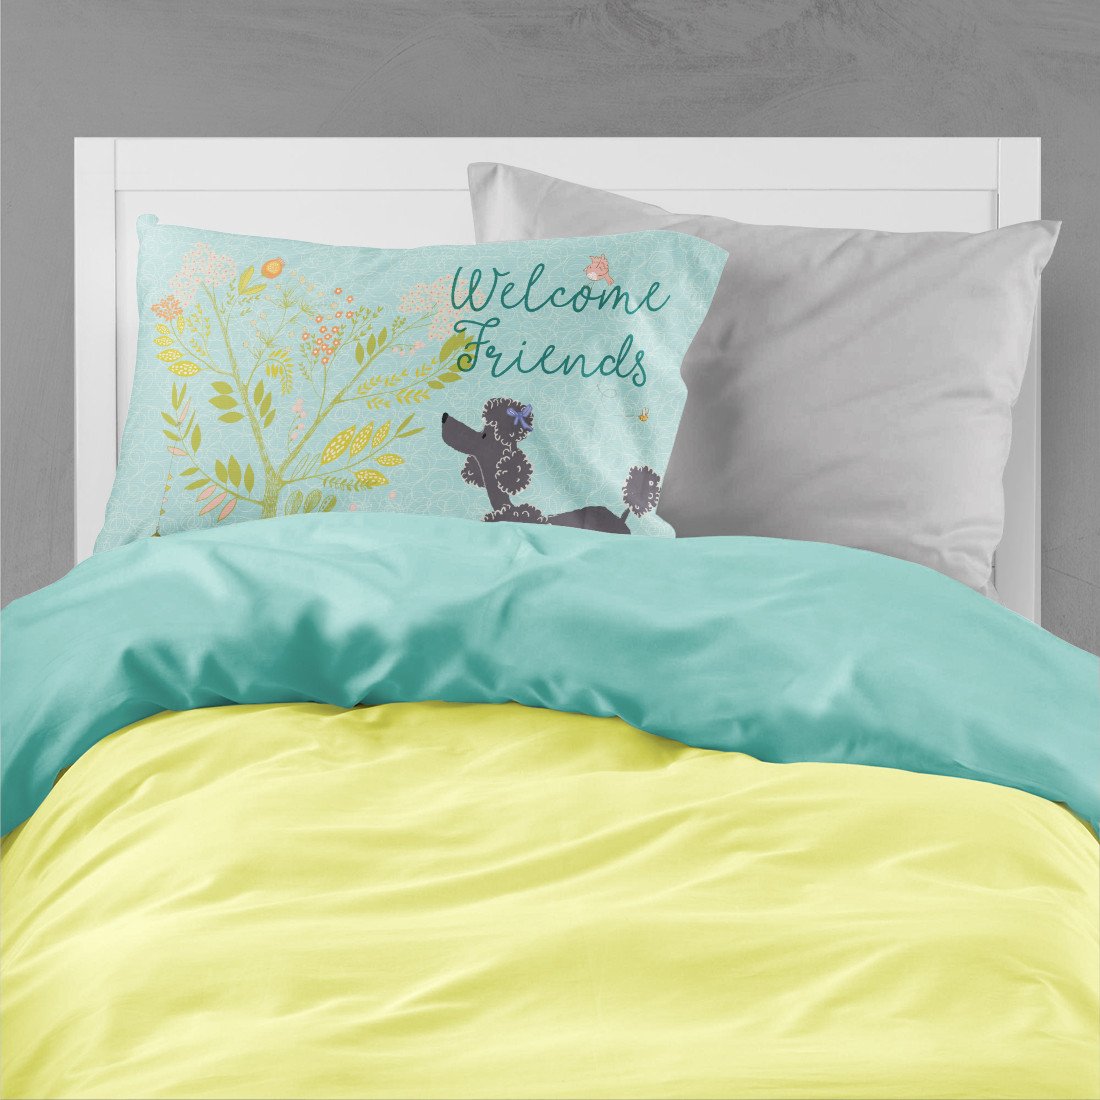 Welcome Friends Black Poodle Fabric Standard Pillowcase BB7615PILLOWCASE by Caroline's Treasures